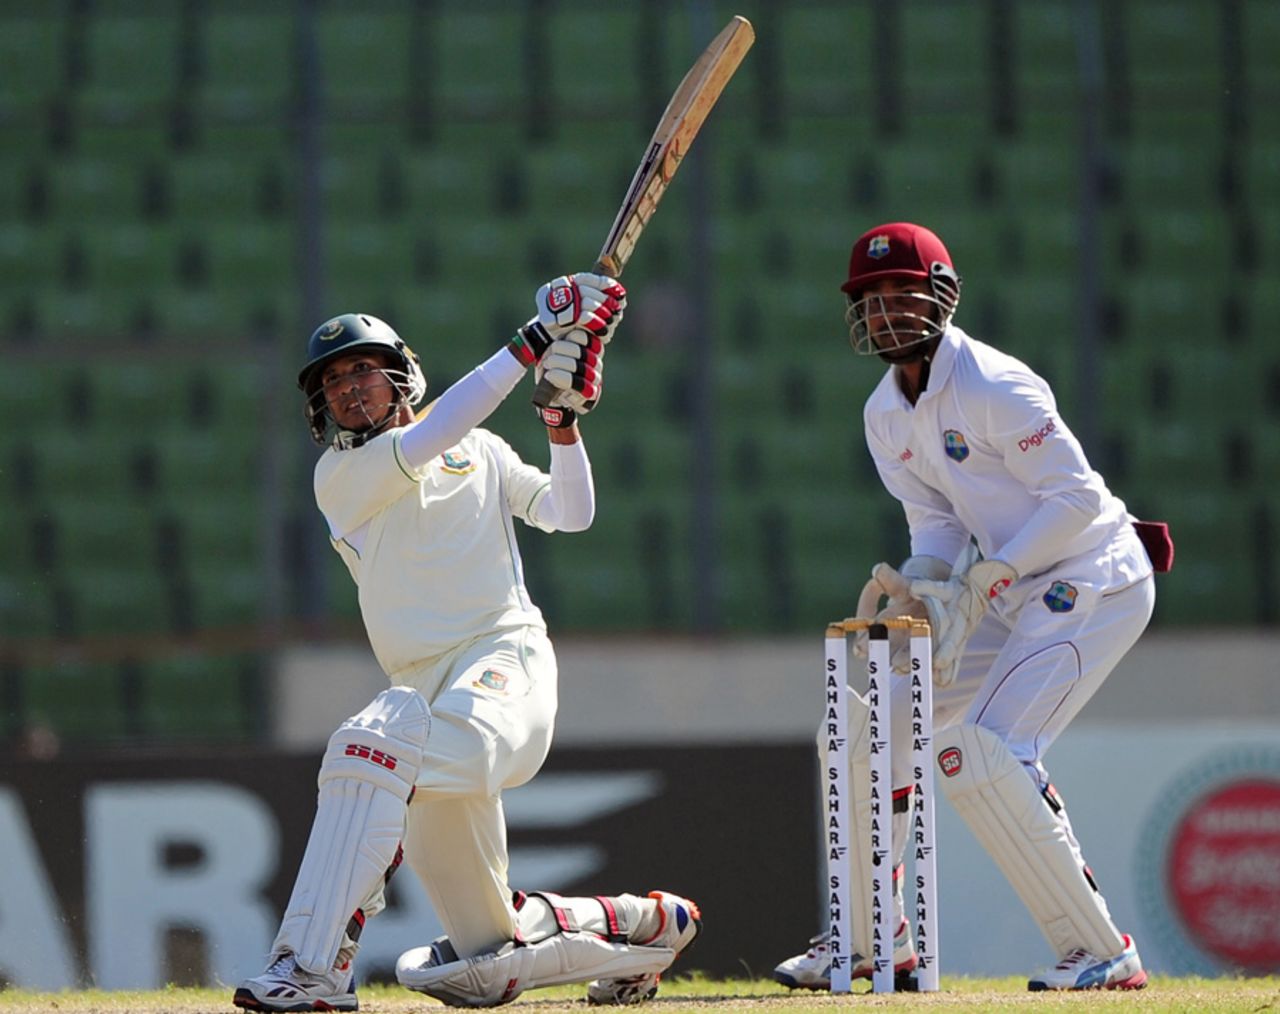 Nasir Hossain slams one over midwicket, Bangladesh v West Indies, 1st Test, Mirpur, 4th day, November 16, 2012